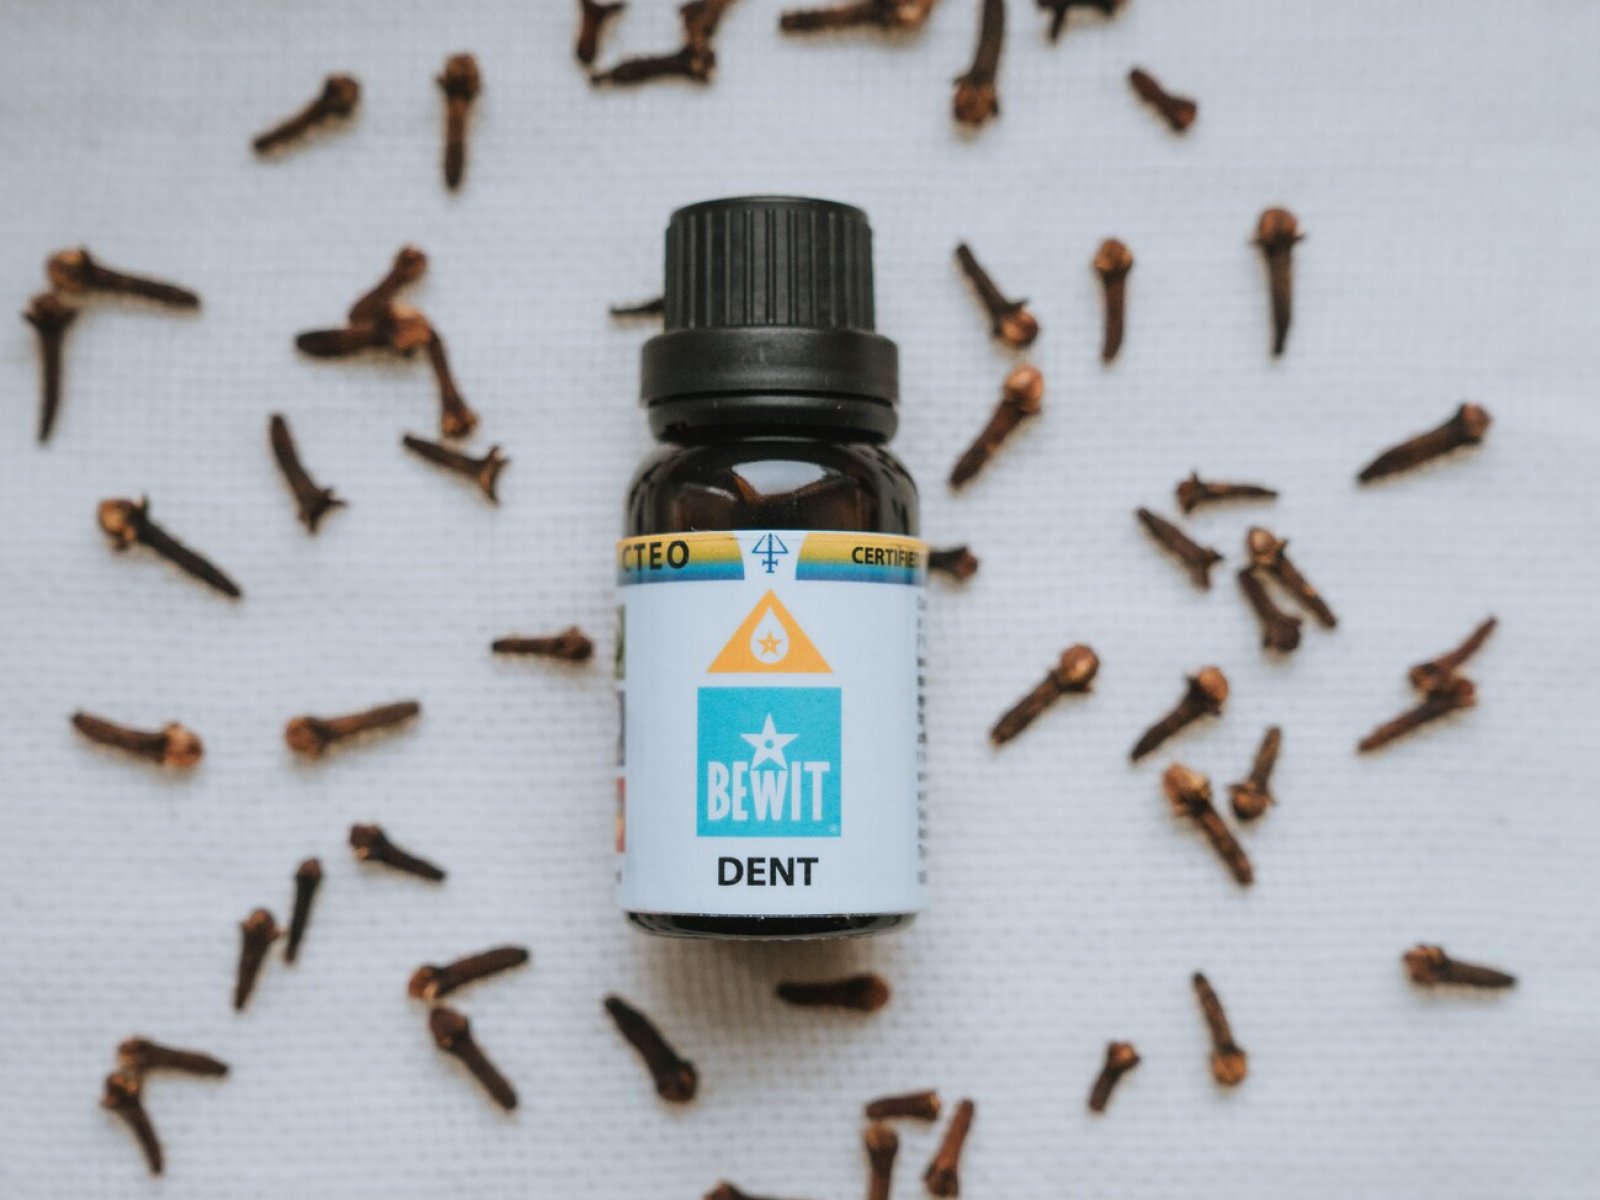 BEWIT DENT - 100% natural essential oil blend in CTEO® quality - 9